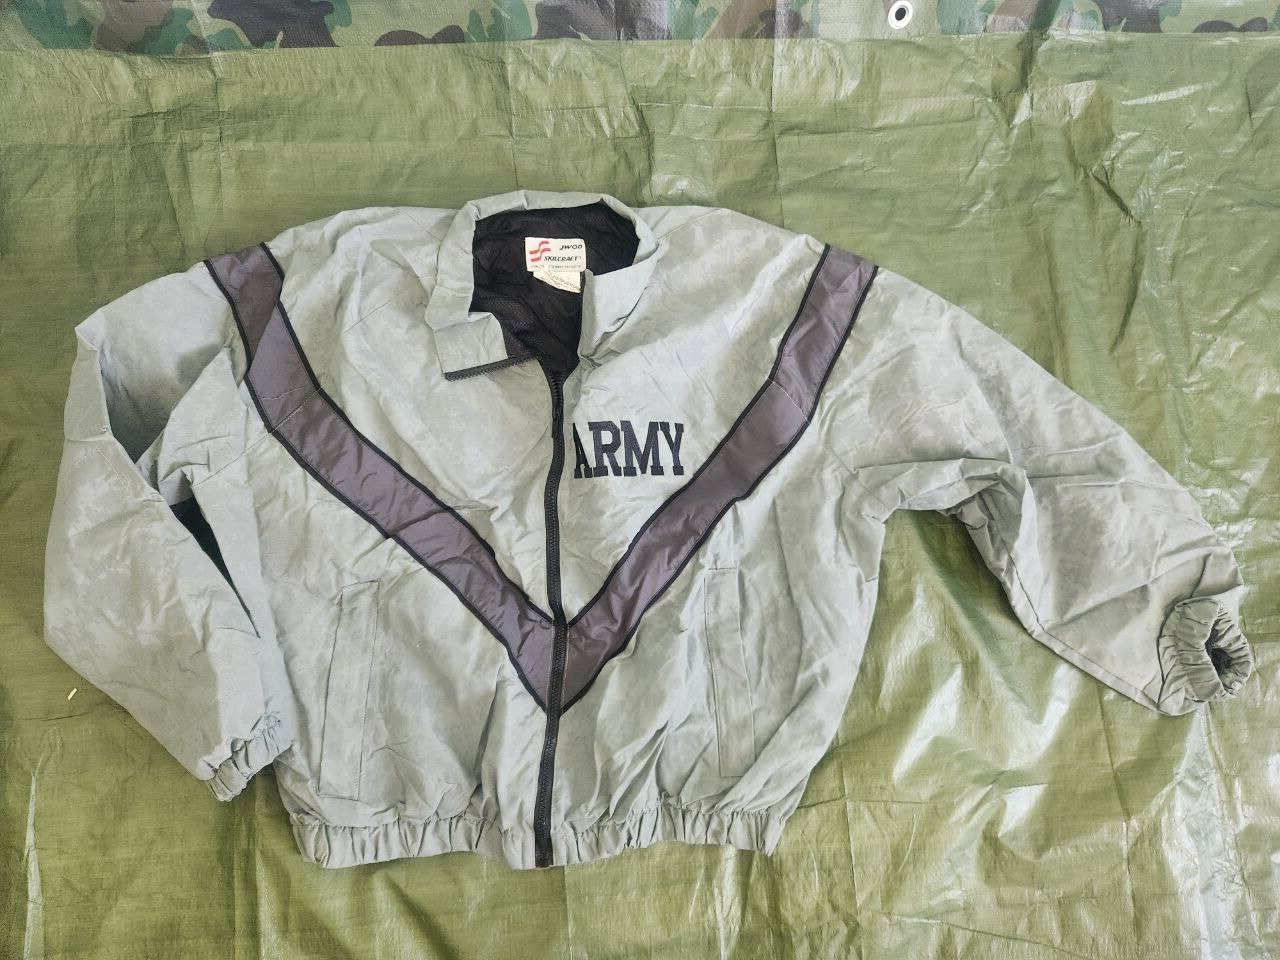 Army Physical Fitness Uniform Jacket, Small-Short, NSN 8415-01-575-4046